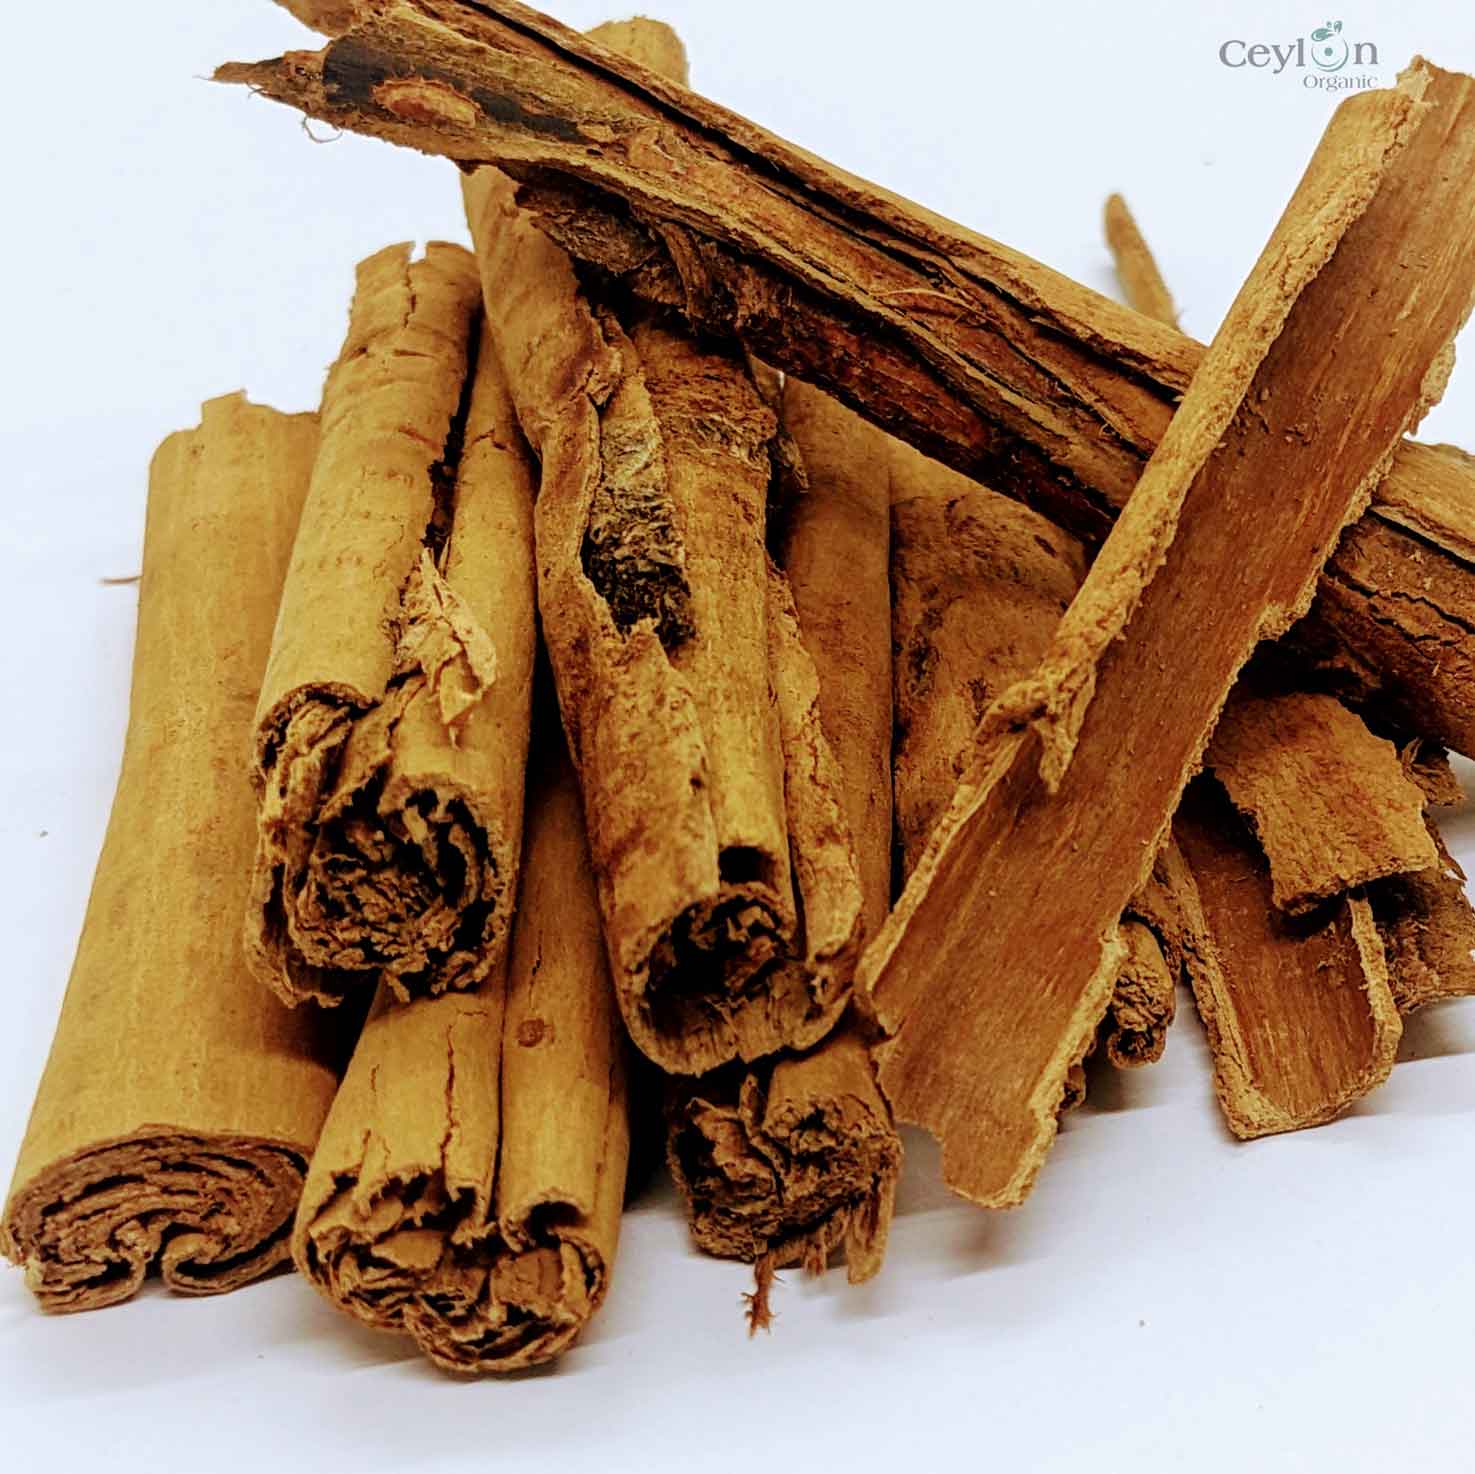 2kg+ Cinnamon Sticks - The Perfect Spice for Baking, Cooking, and Tea | Ceylon Organic-2